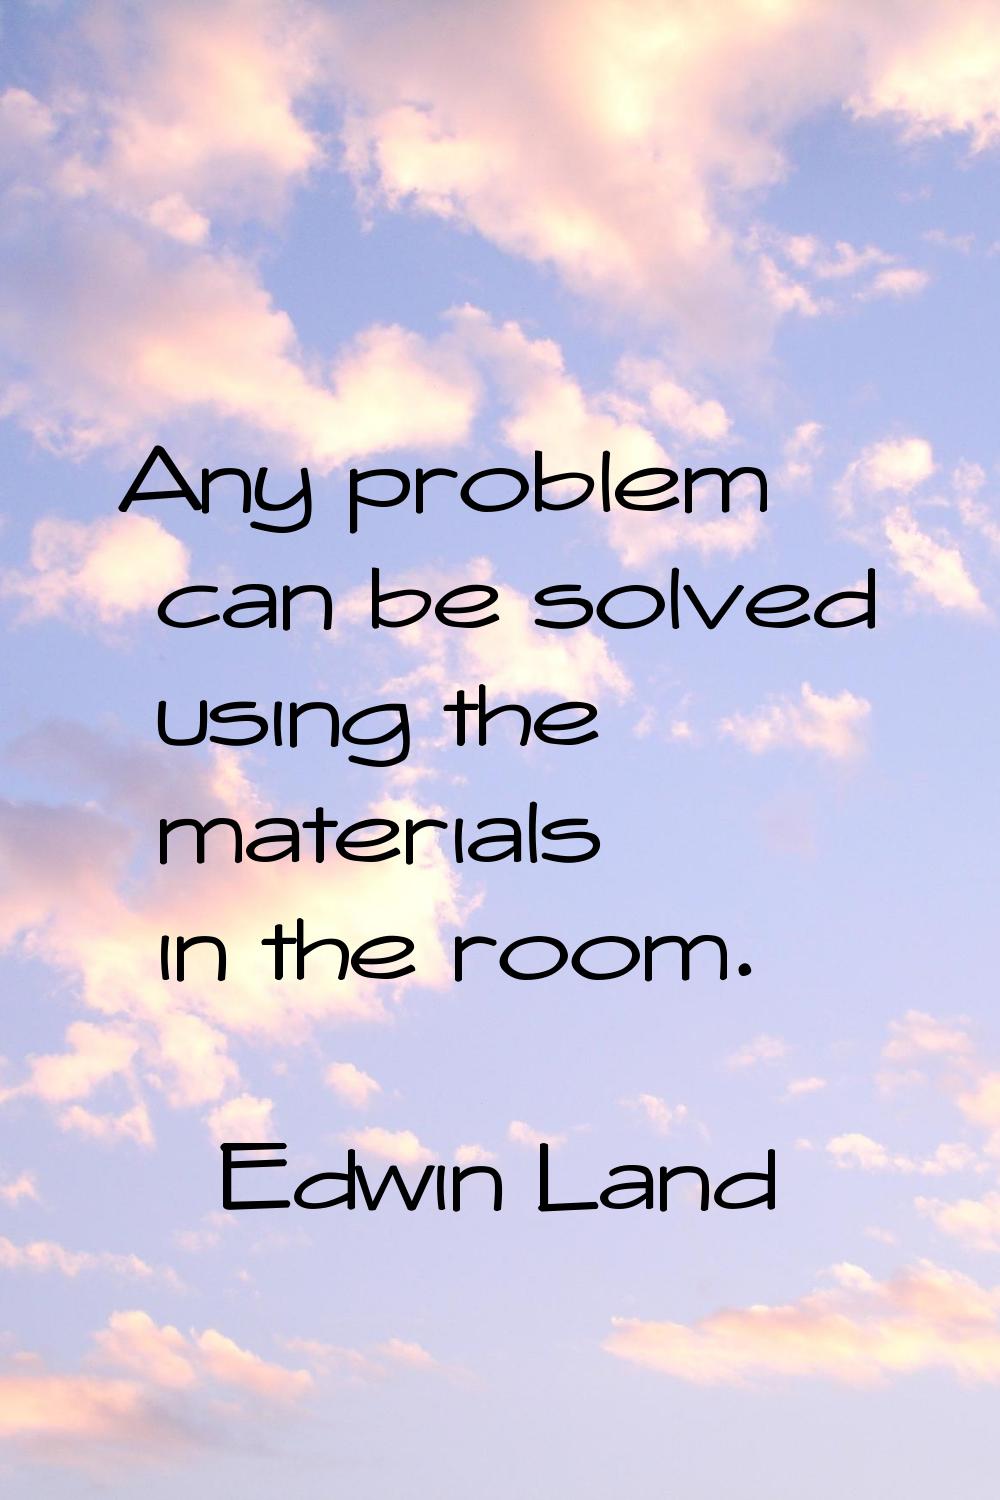 Any problem can be solved using the materials in the room.